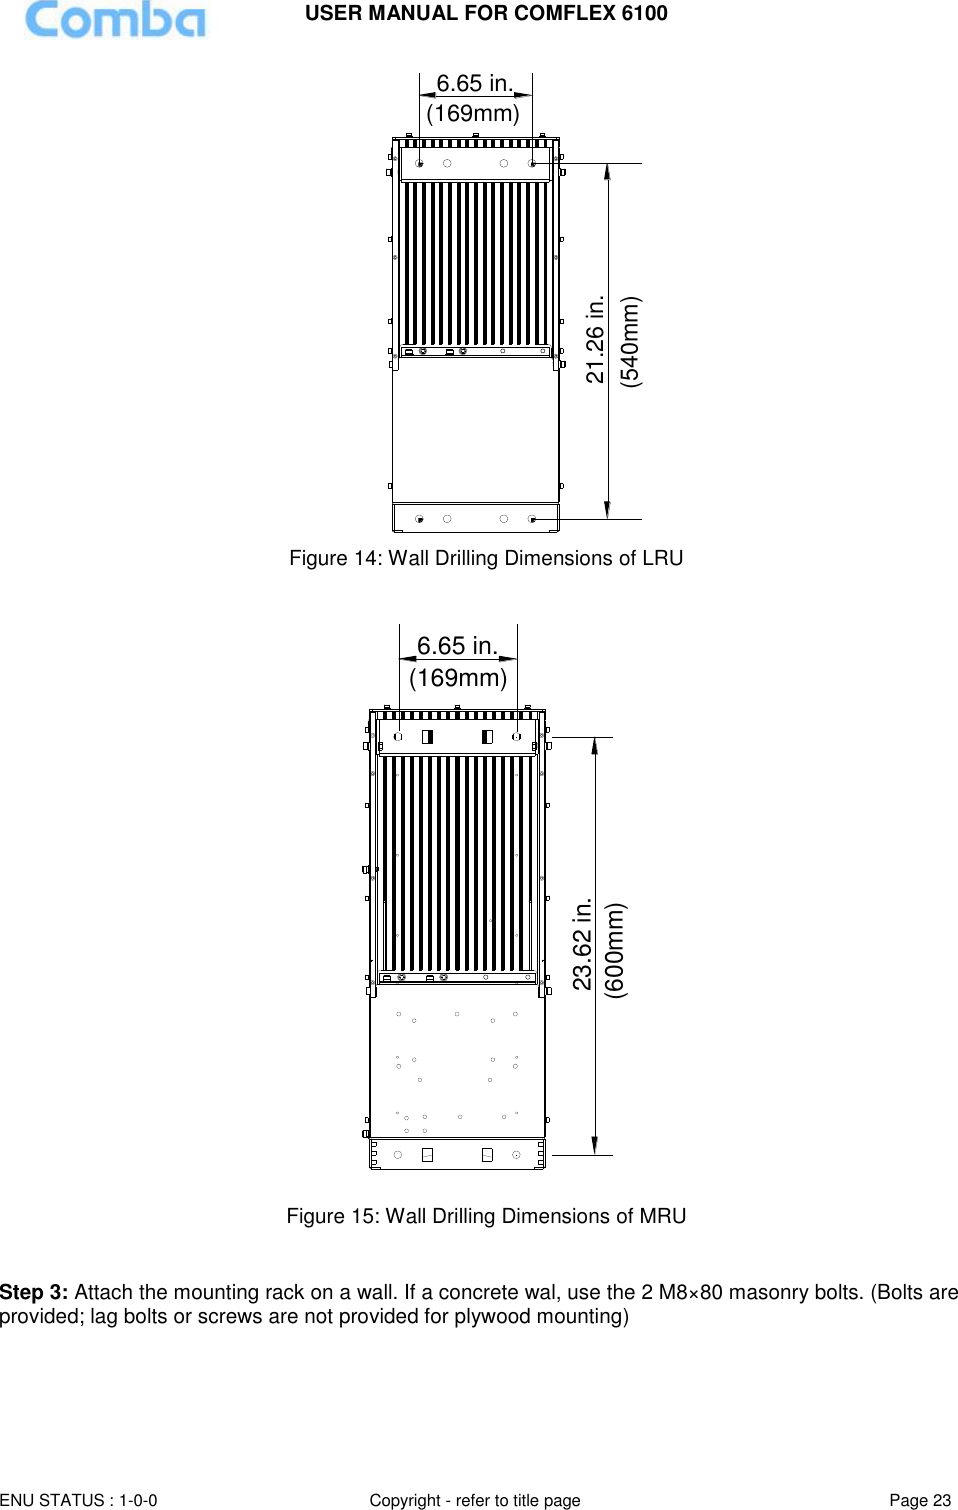 USER MANUAL FOR COMFLEX 6100 ENU STATUS : 1-0-0 Copyright - refer to title page Page 23  6.65 in.21.26 in.(540mm)(169mm) Figure 14: Wall Drilling Dimensions of LRU  6.65 in.(169mm)23.62 in.(600mm) Figure 15: Wall Drilling Dimensions of MRU   Step 3: Attach the mounting rack on a wall. If a concrete wal, use the 2 M8×80 masonry bolts. (Bolts are provided; lag bolts or screws are not provided for plywood mounting)  